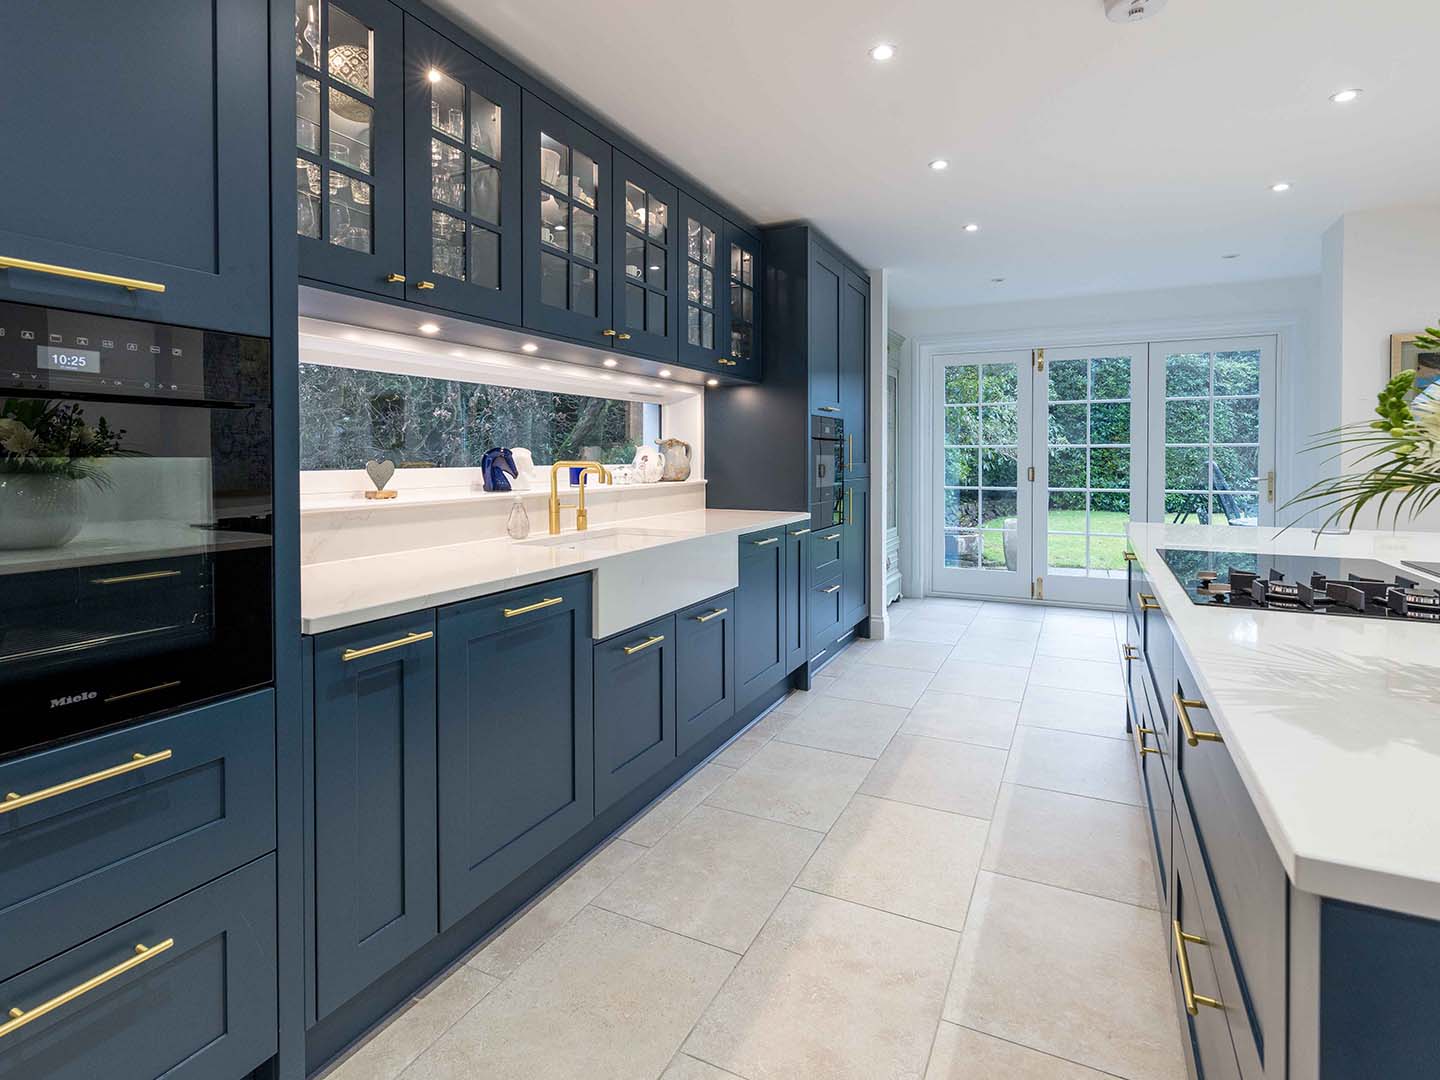 Blue Callerton kitchen cupboards, gold featured handles and white marble worktops paired with white sink